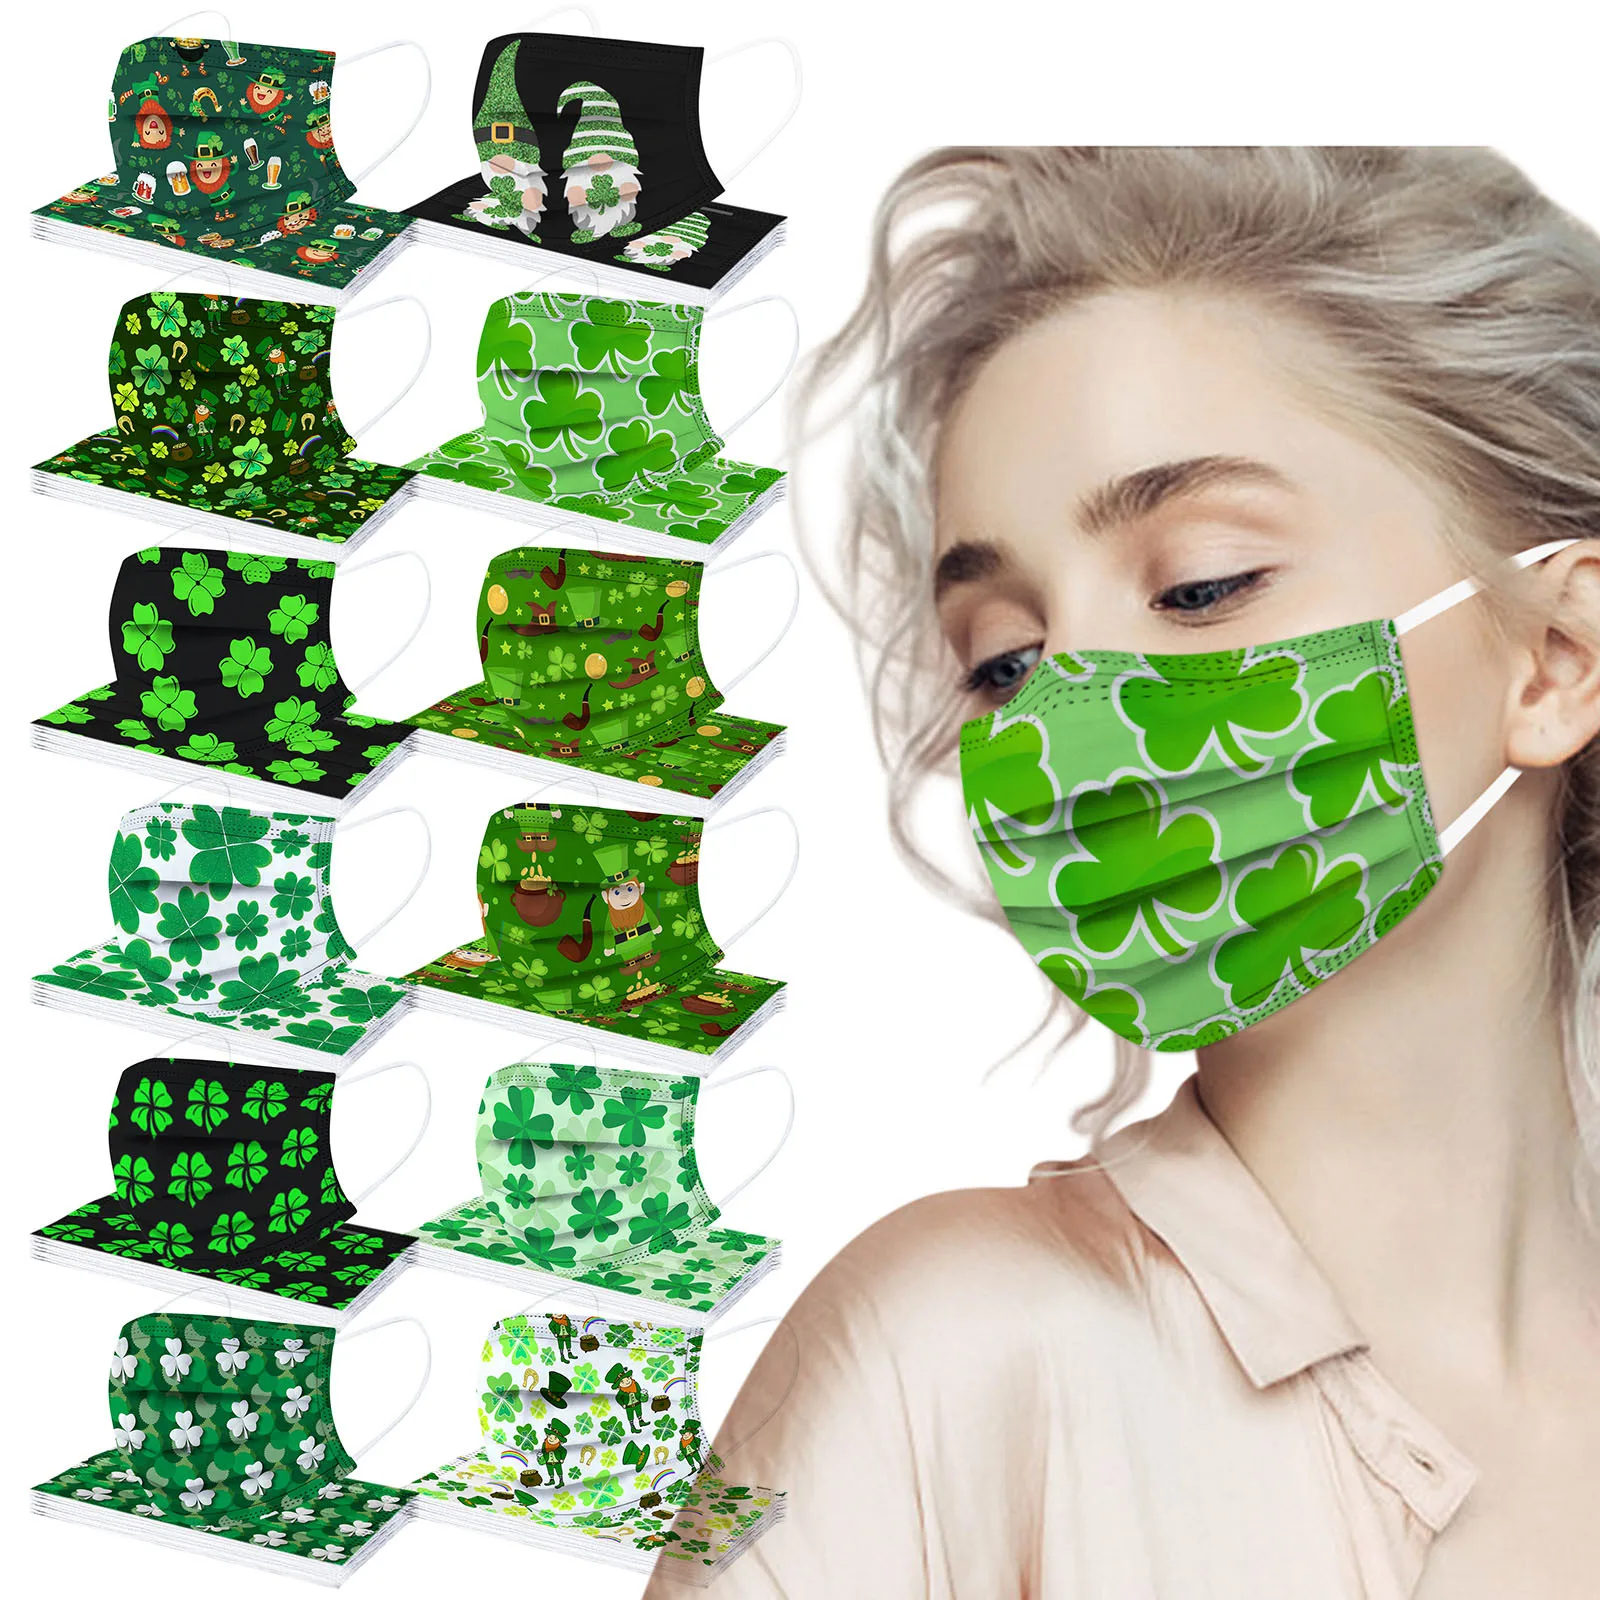 

10pc Disposable Adult Mask St. Patrick's Day Mask Mouth Cover 3ply Ear Loop Mask Mascarillas Desechable Masque Halloween Cosplay